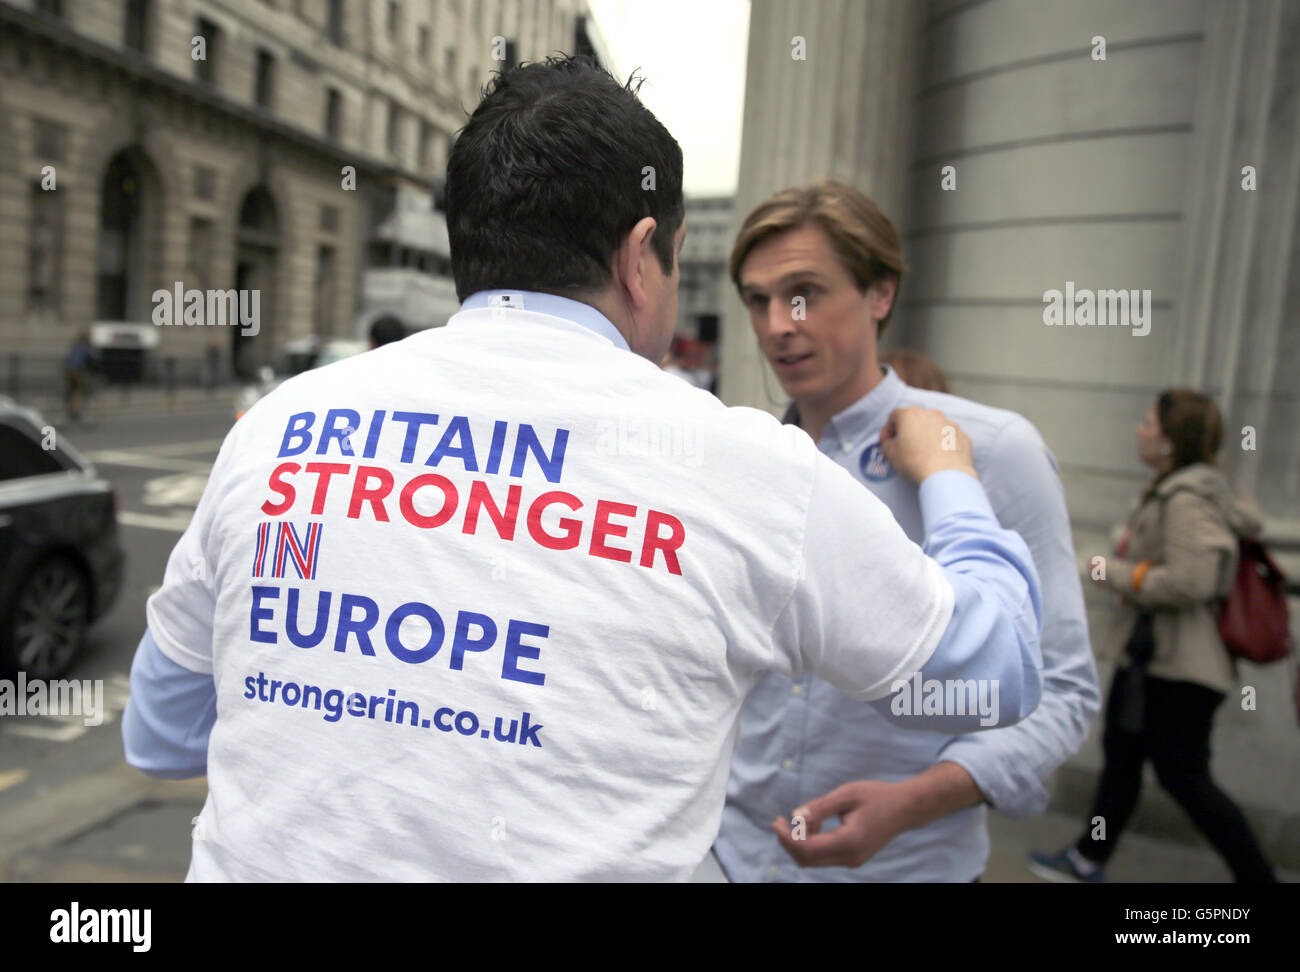 London, Britain. 23rd June, 2016. An activist of the 'Britain stronger in Europe' campaign distributes stickers for the Remain campaign on the day of the EU referendum, in London, Britain, 23 June 2016. Britons are to vote on whether to remain in or leave the EU in a referendum on the same day. Photo: MICHAEL KAPPELER/dpa/Alamy Live News Stock Photo